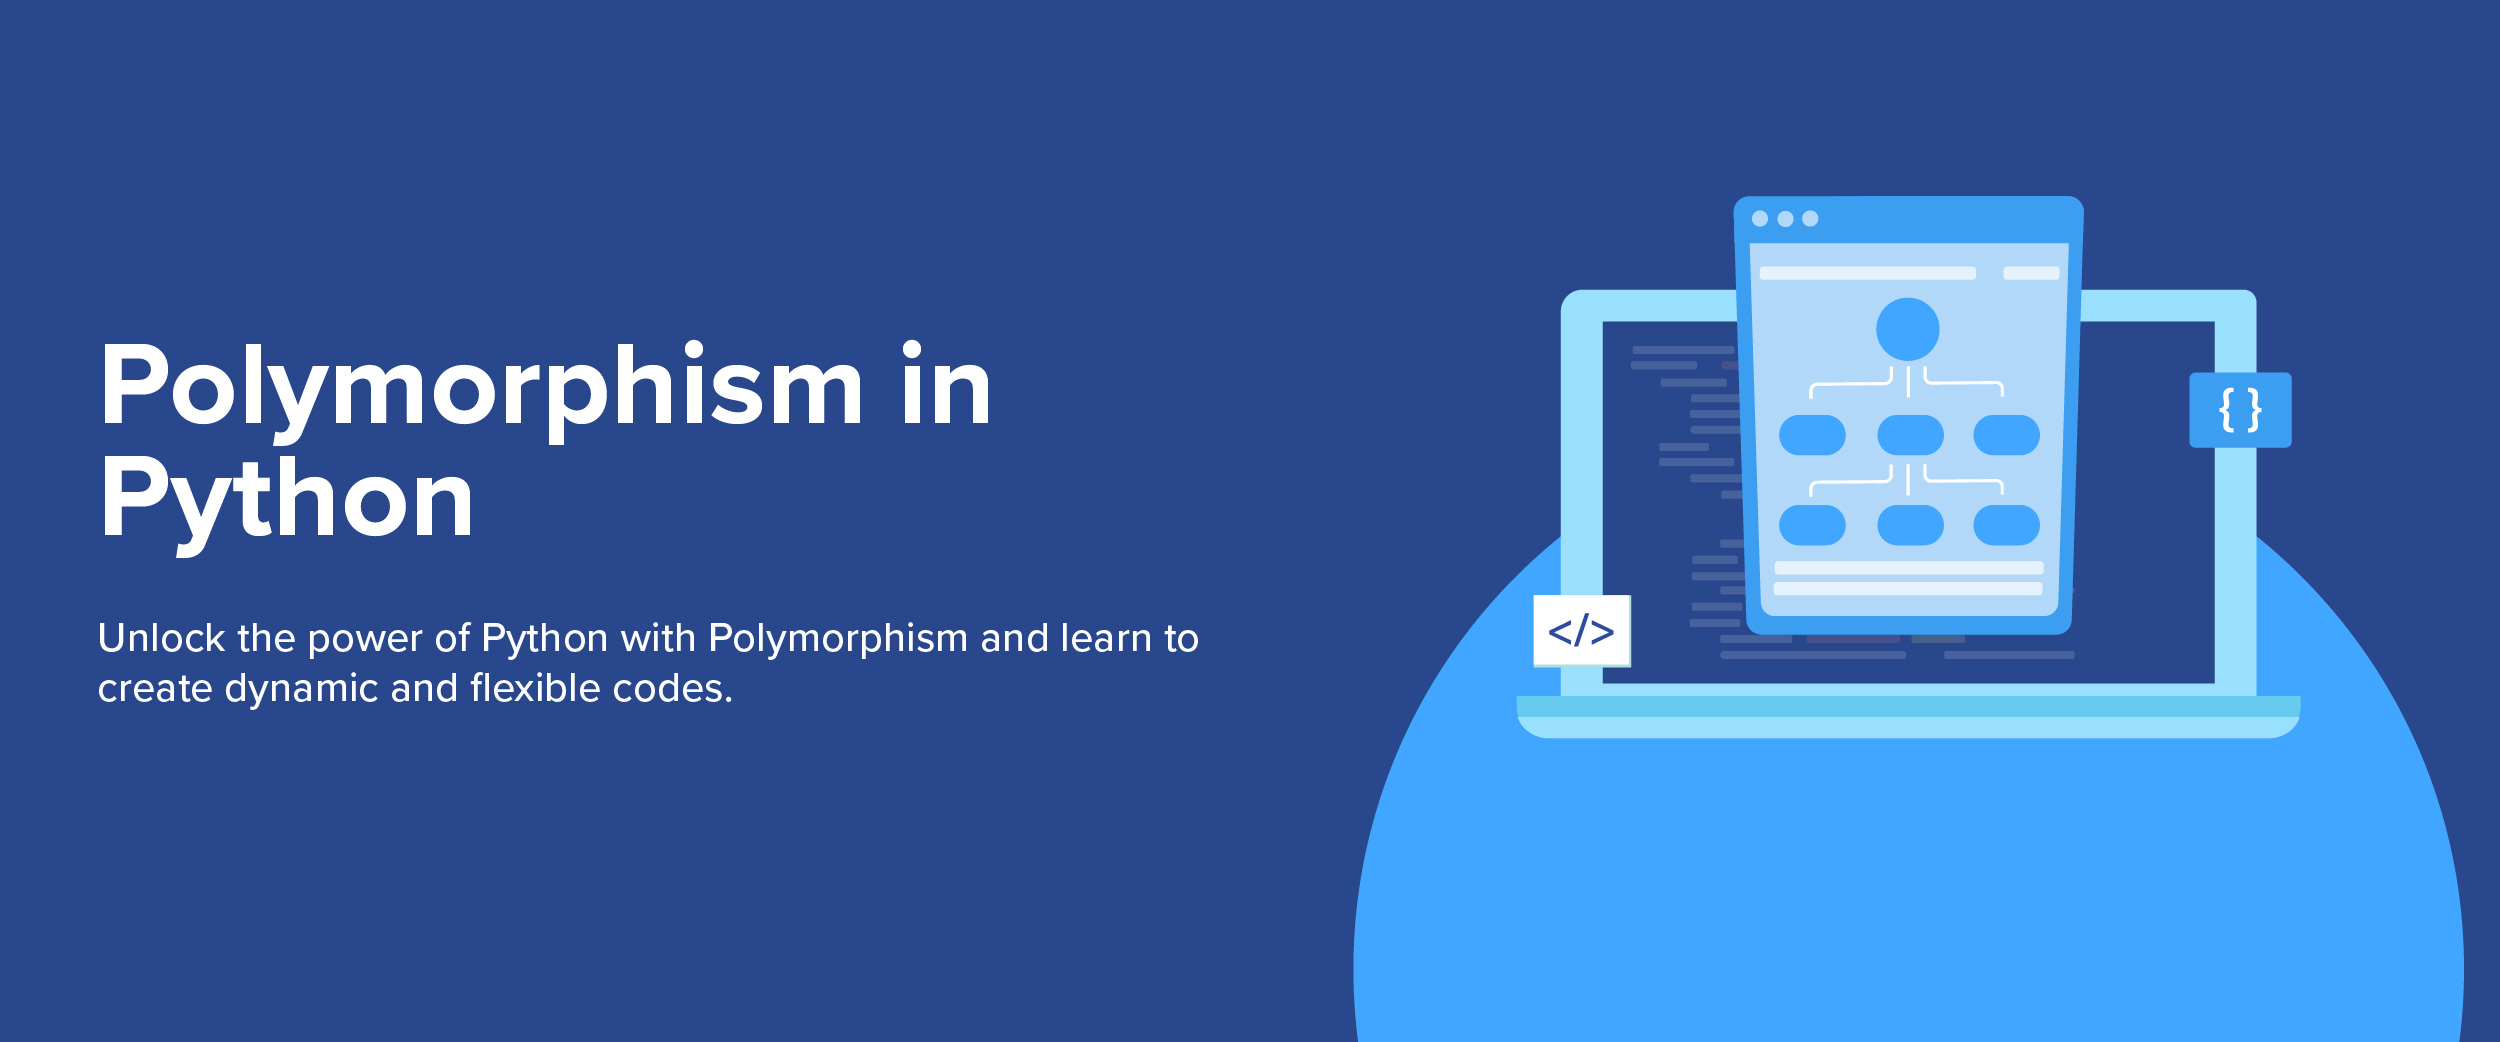 polymorphism in python